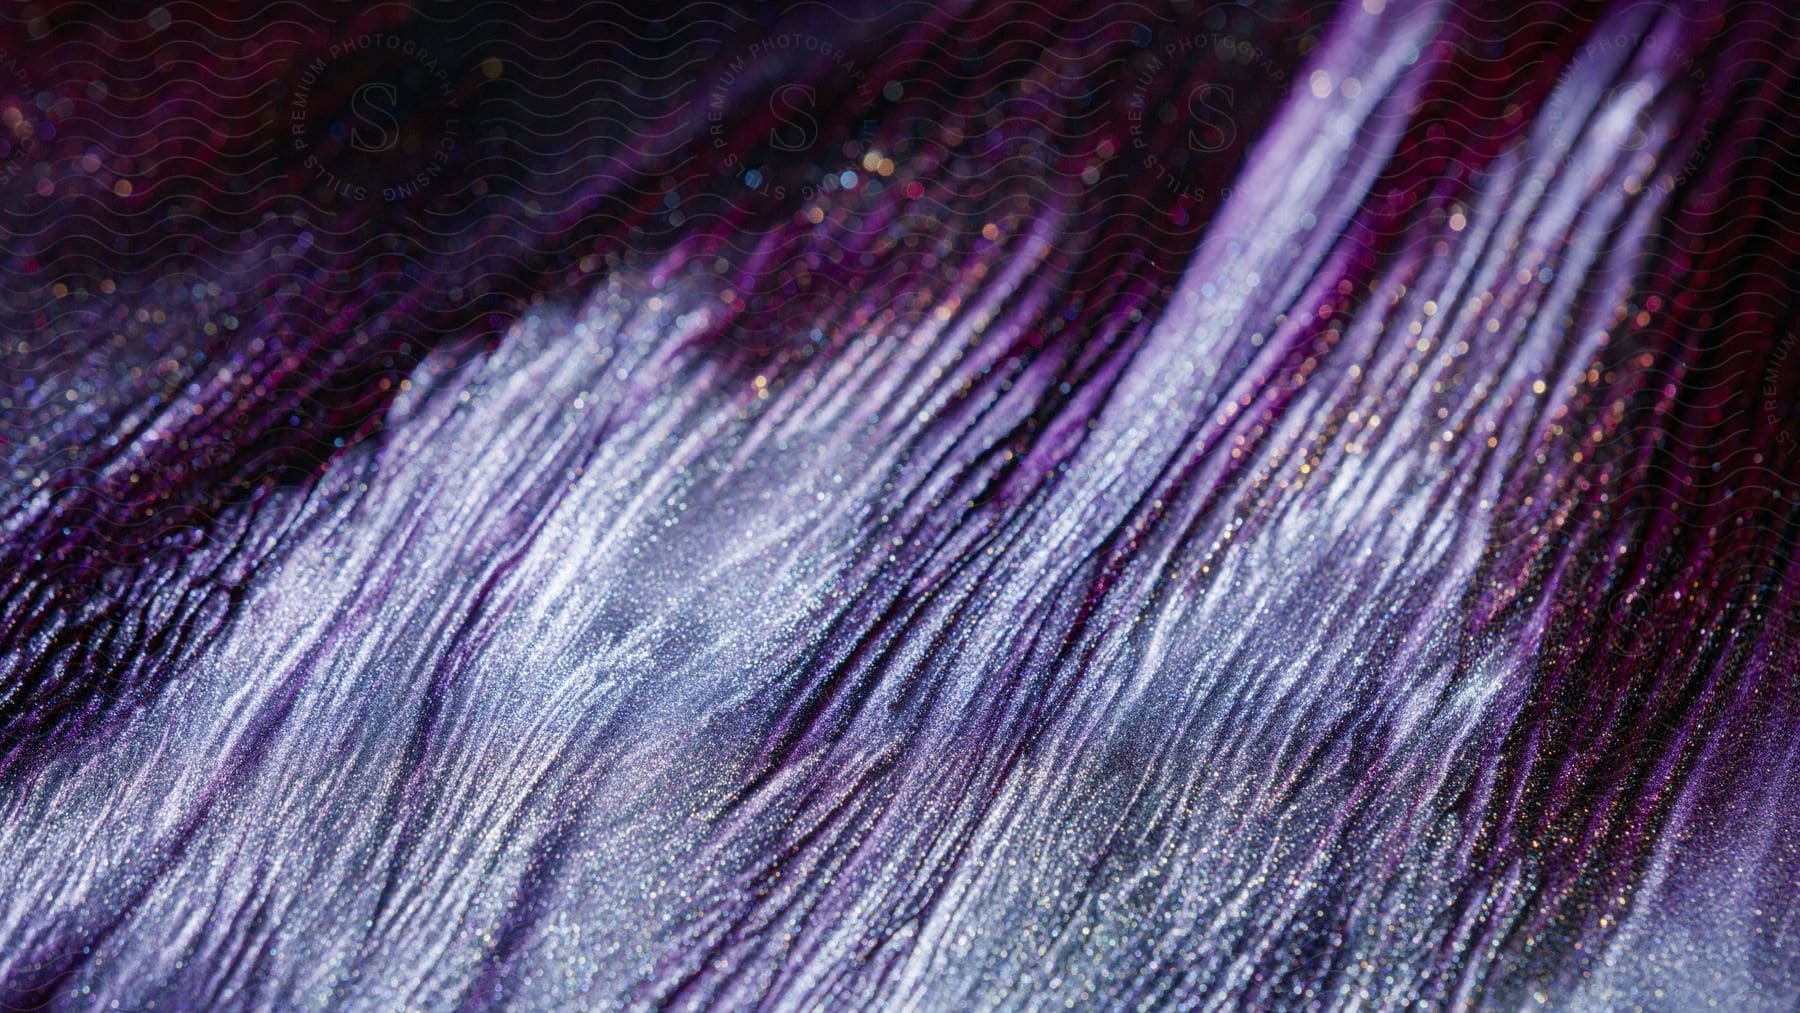 A close-up of shimmering purple and gold glitter texture.